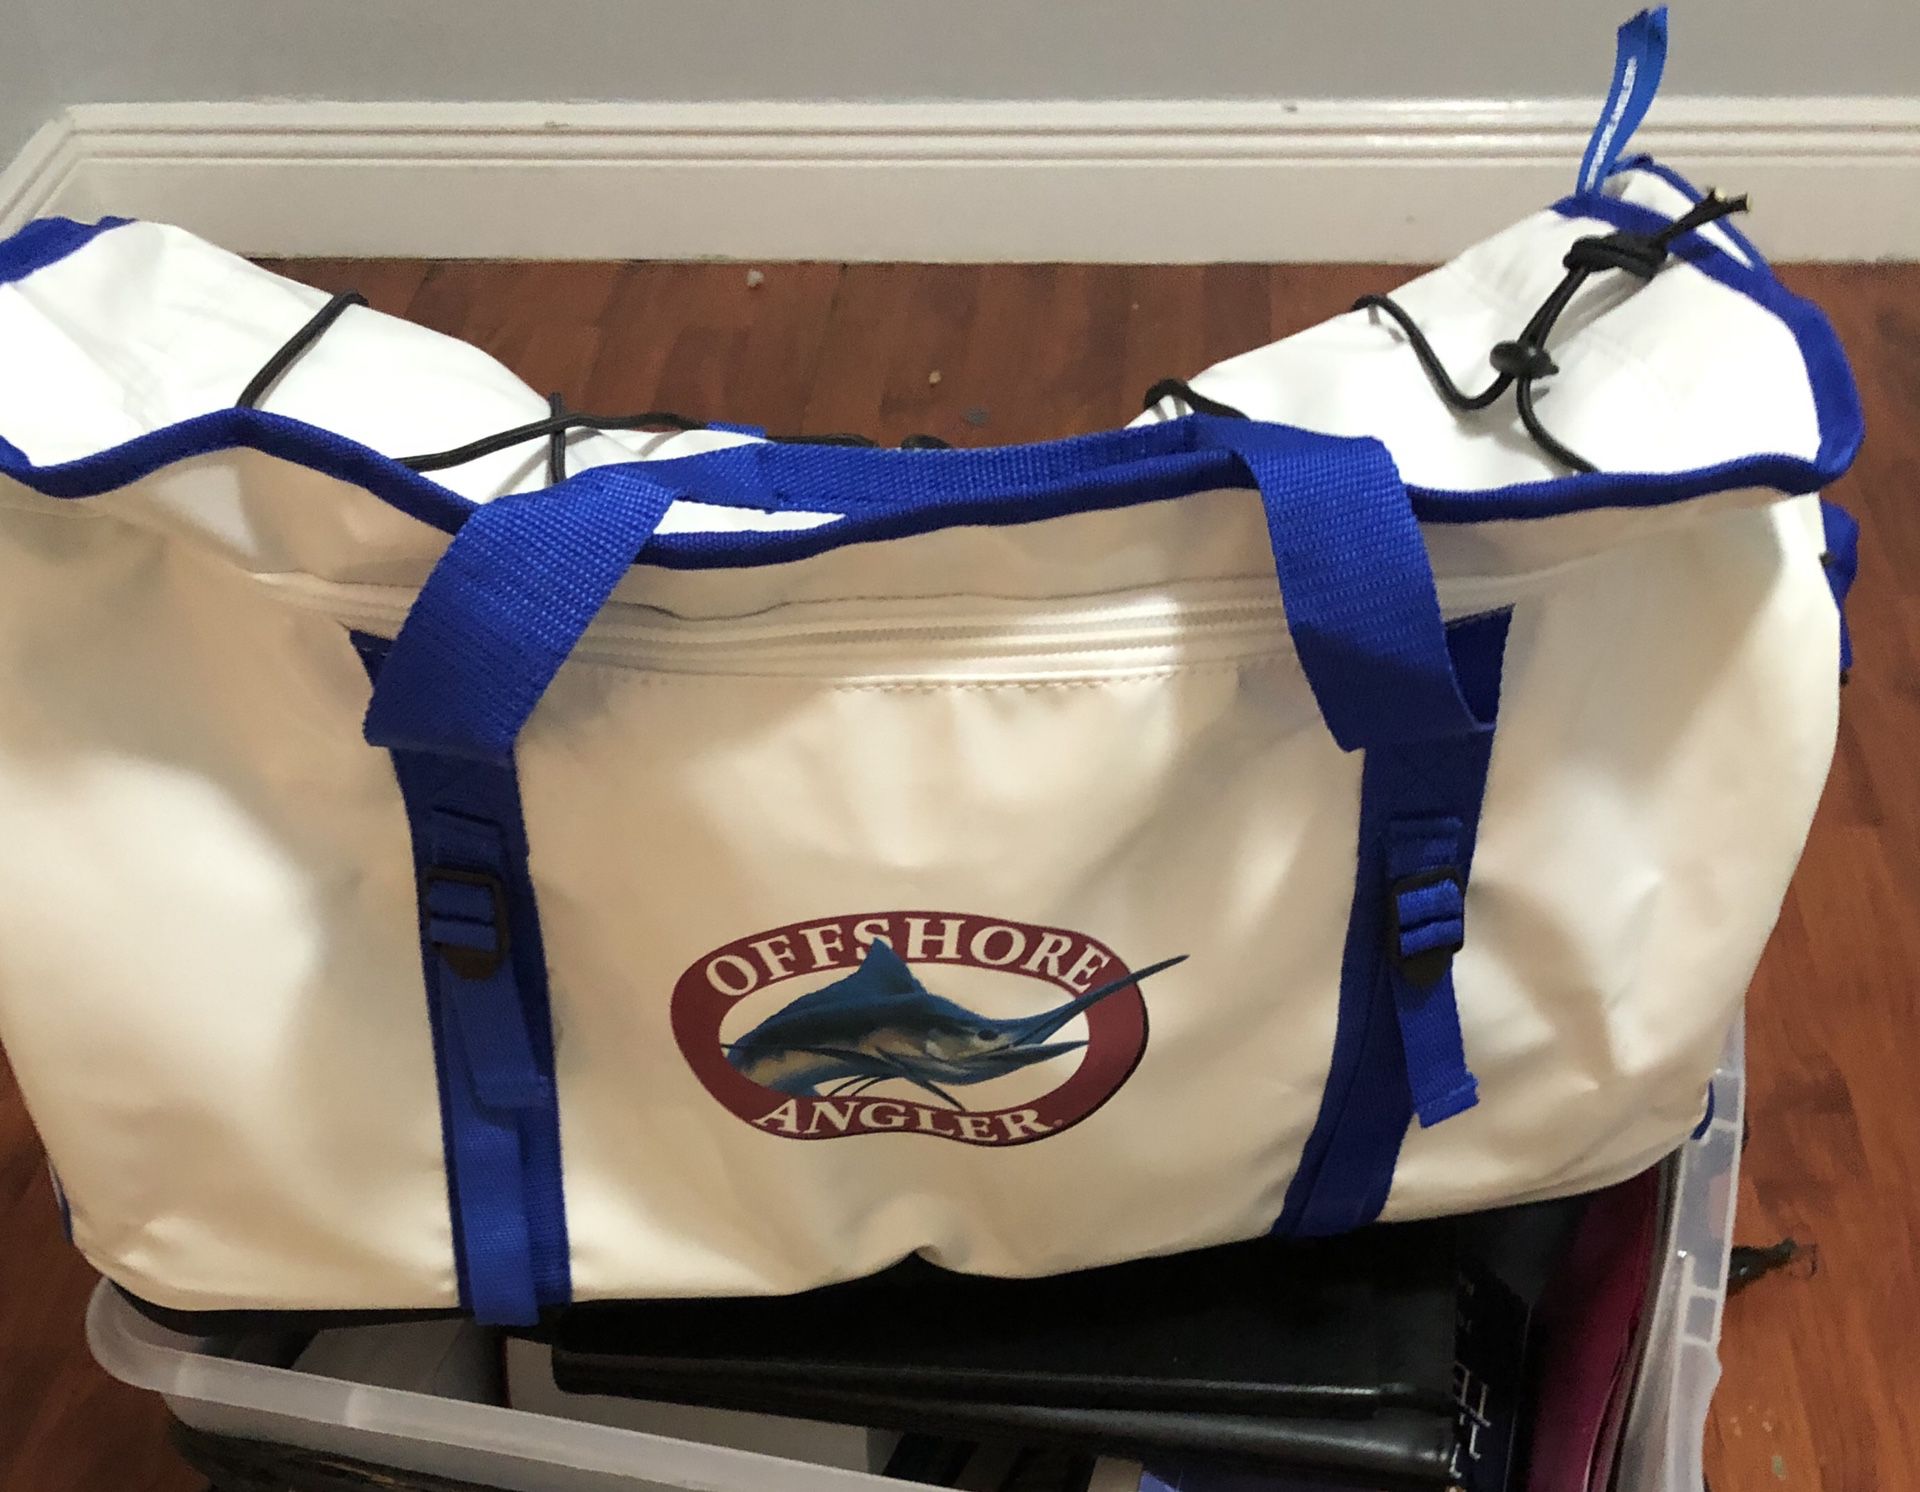 Offshore Anglers bag